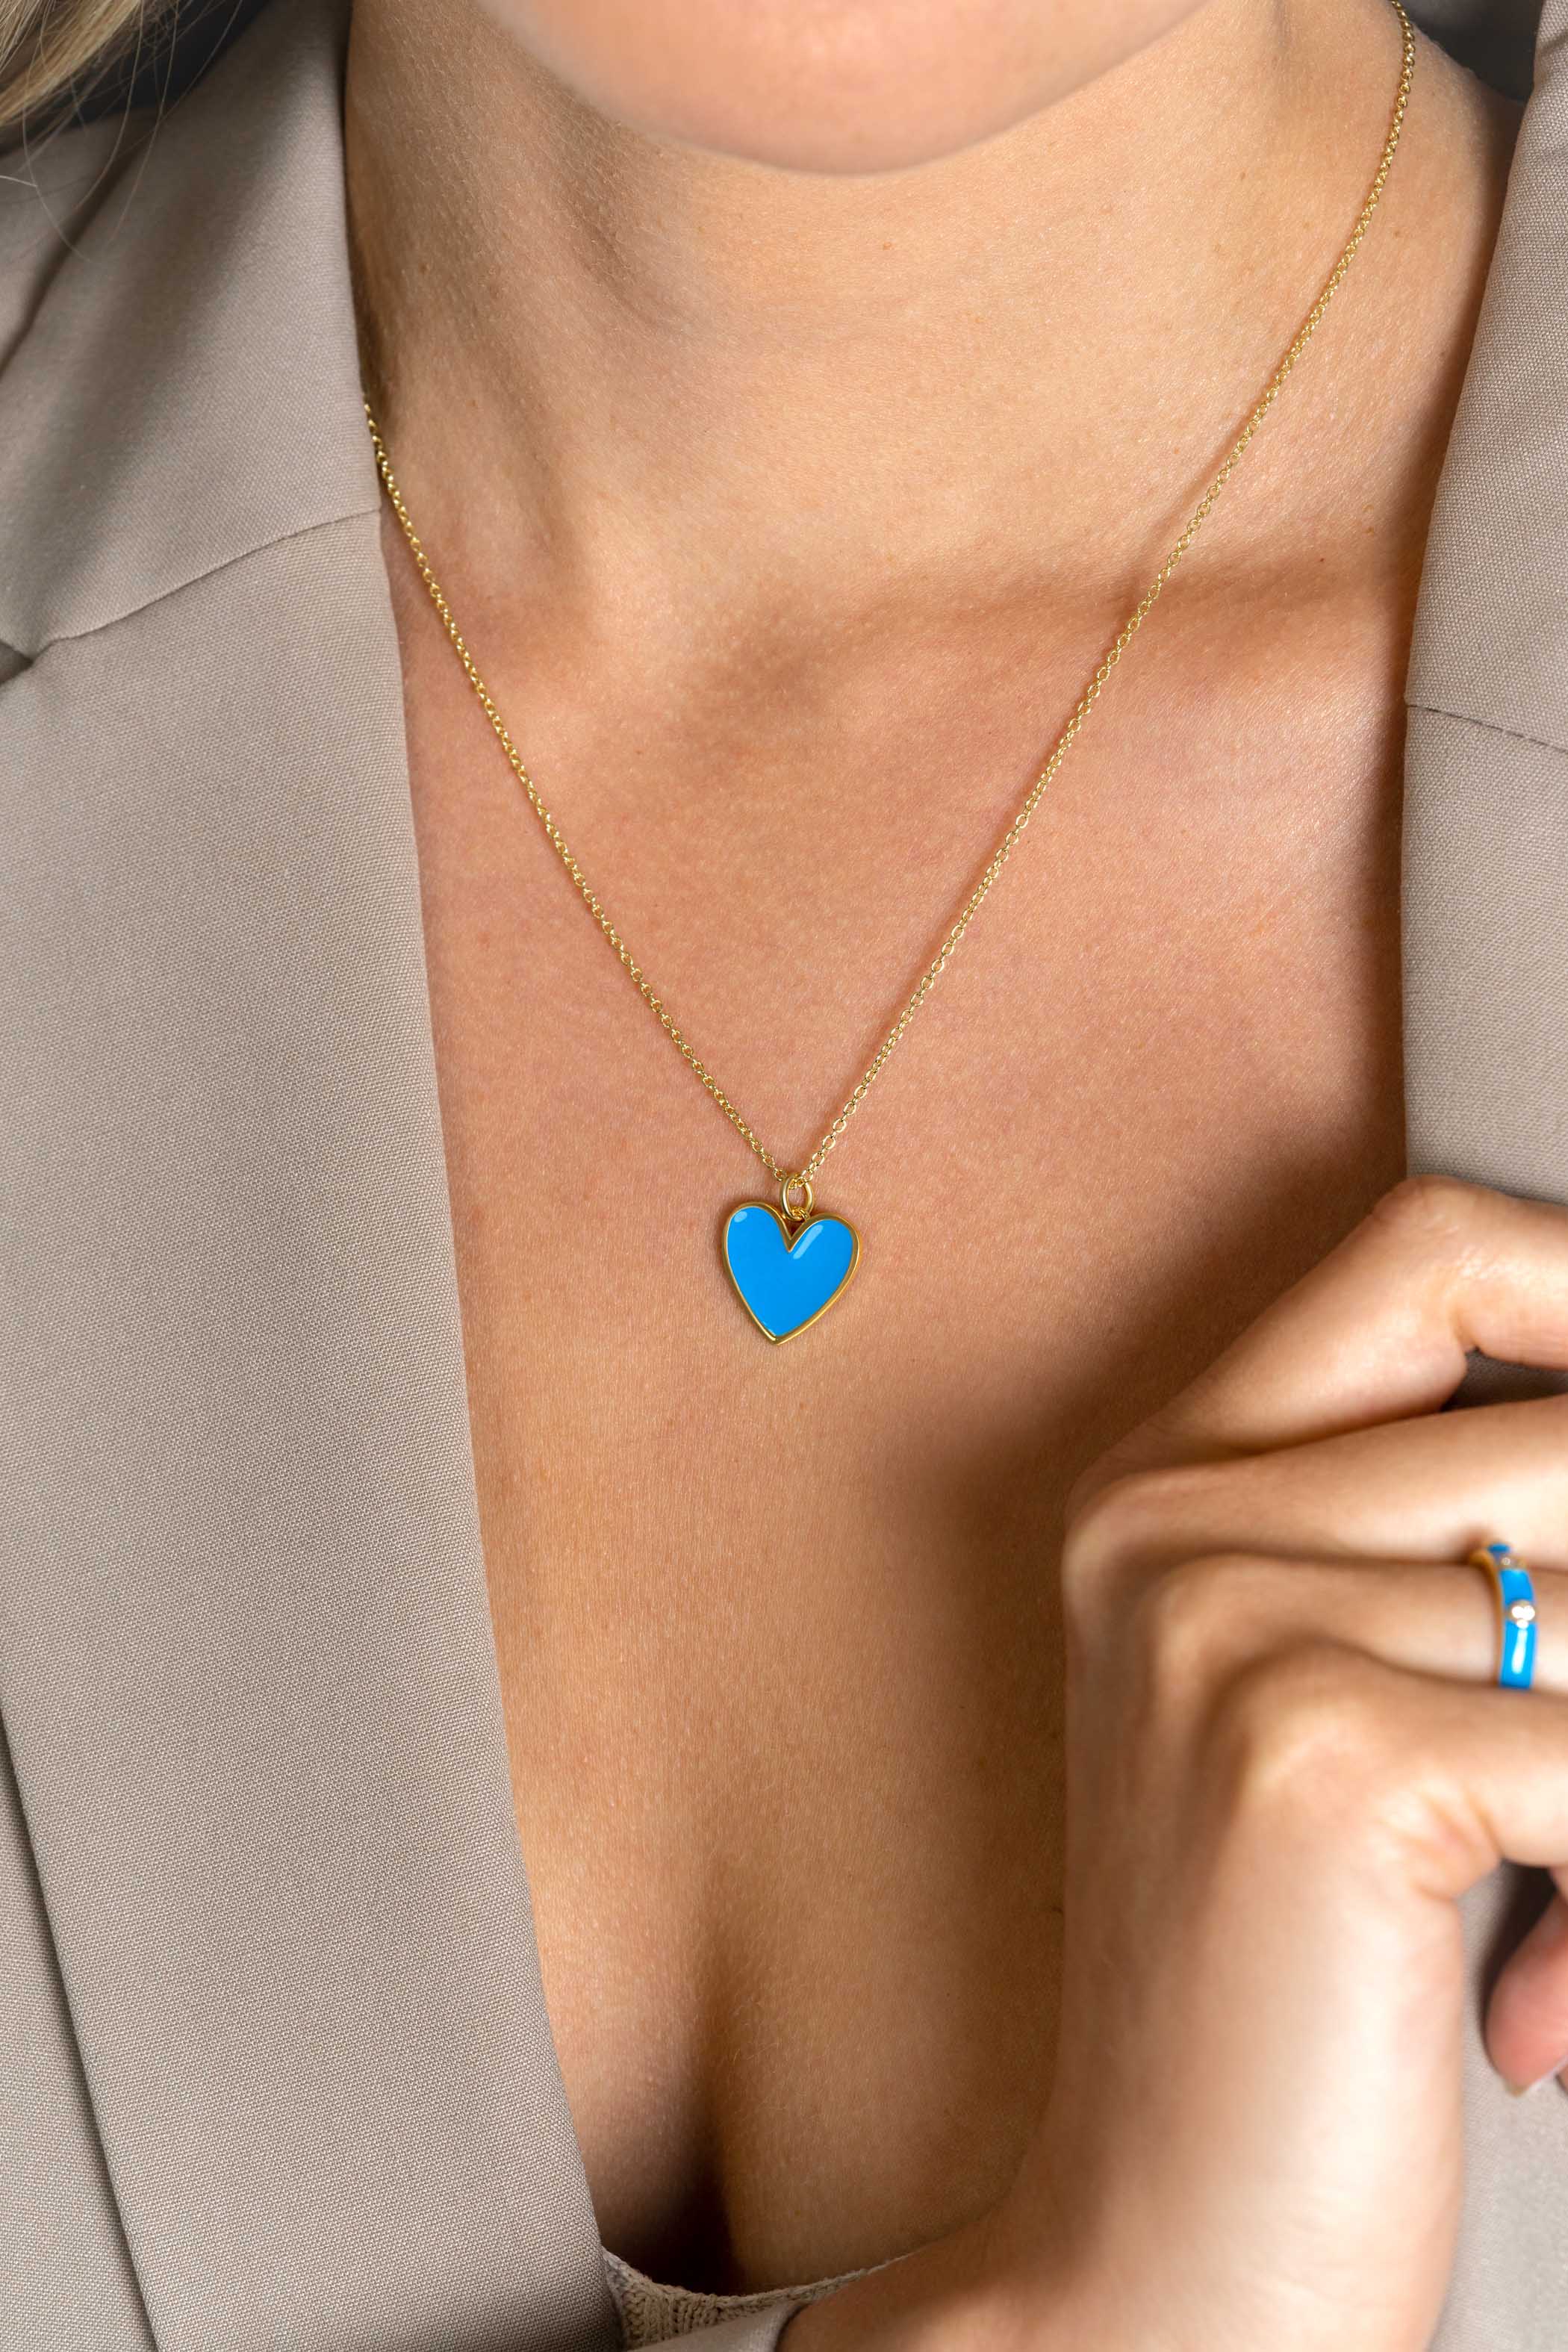 15mm ZINZI Gold Plated Sterling Silver Pendant Heart with Blue Enamel ZIH2314B (excl. necklace)